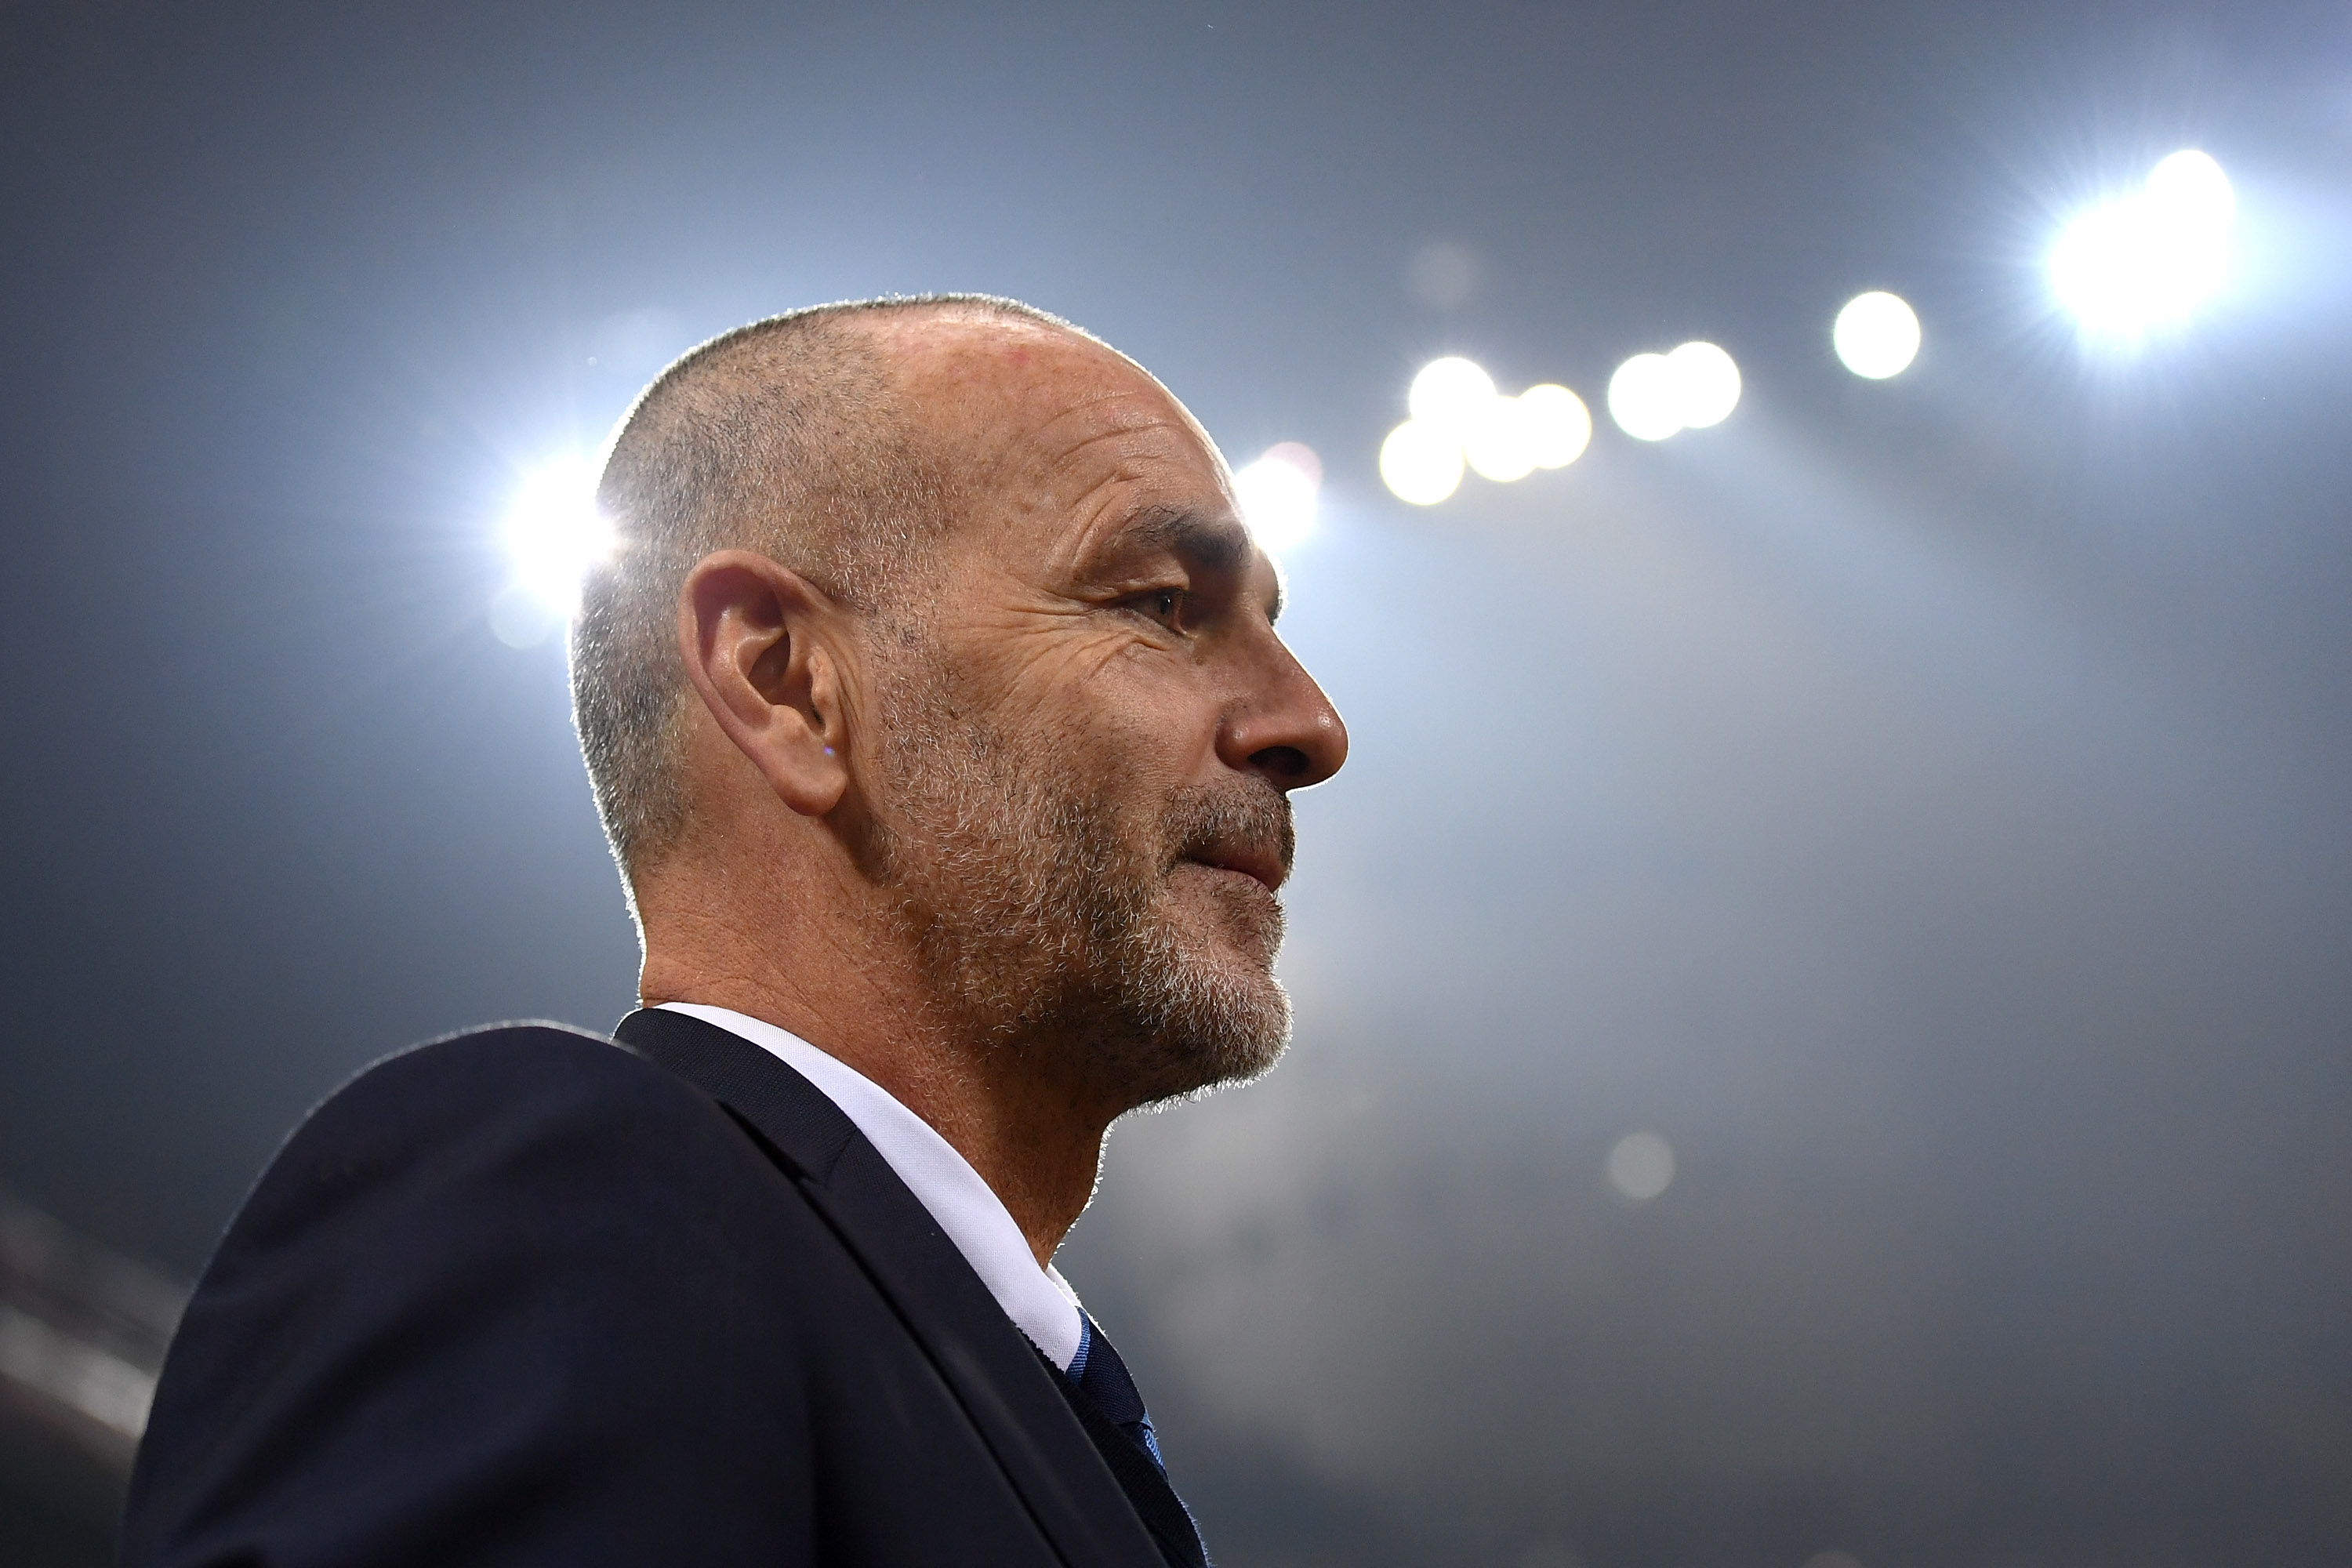 Pioli to Sky: “We had many opportunities to score before the fourth goal”